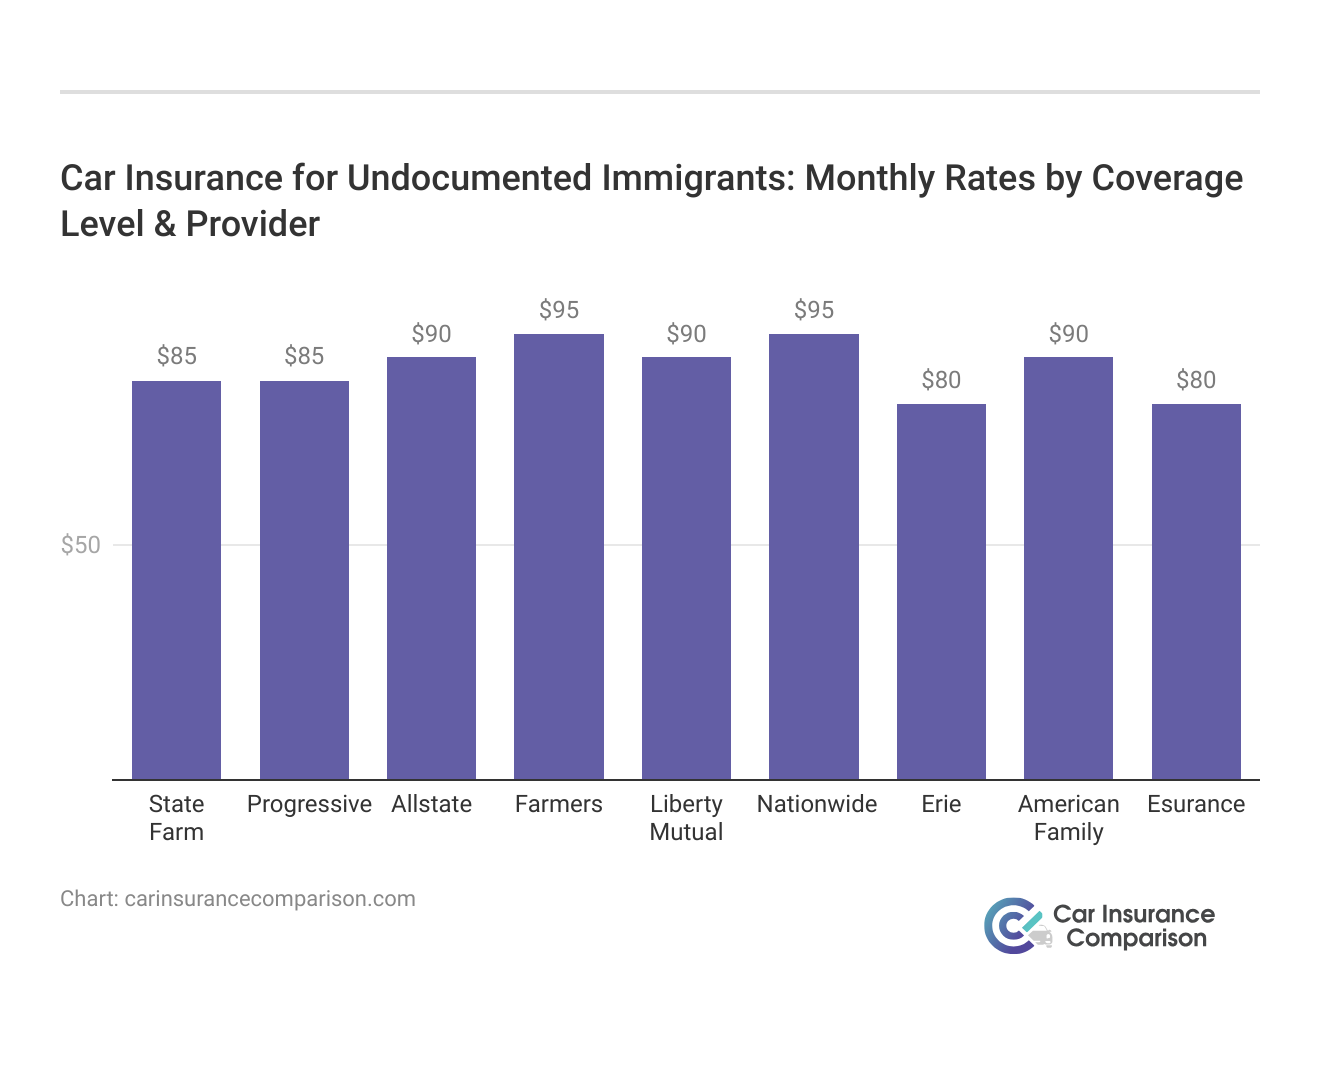 <h3>Car Insurance for Undocumented Immigrants: Monthly Rates by Coverage Level & Provider</h3>